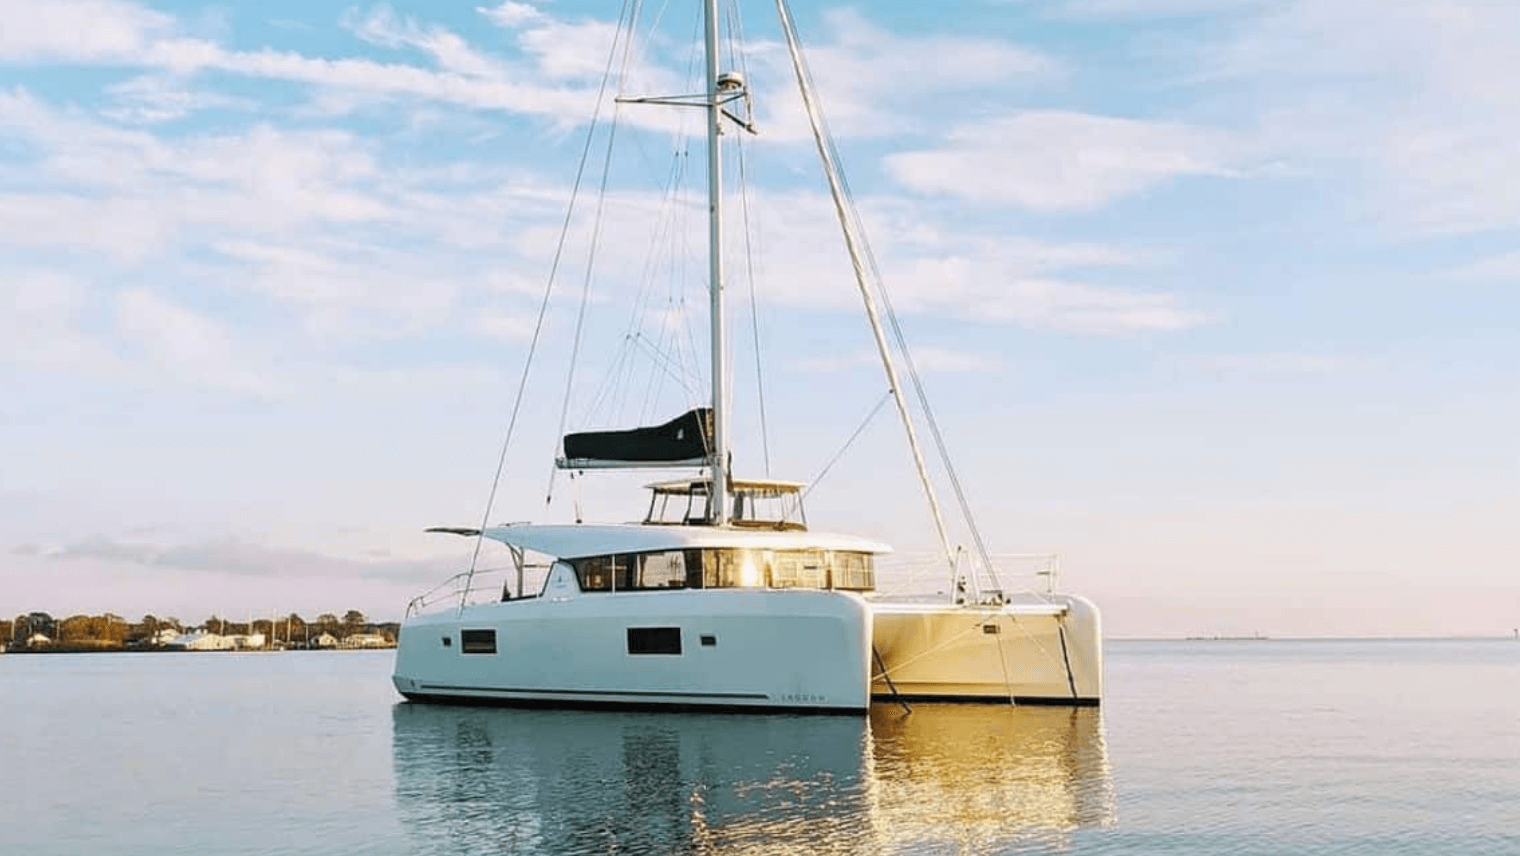 Can You "Heave To" in a Catamaran?